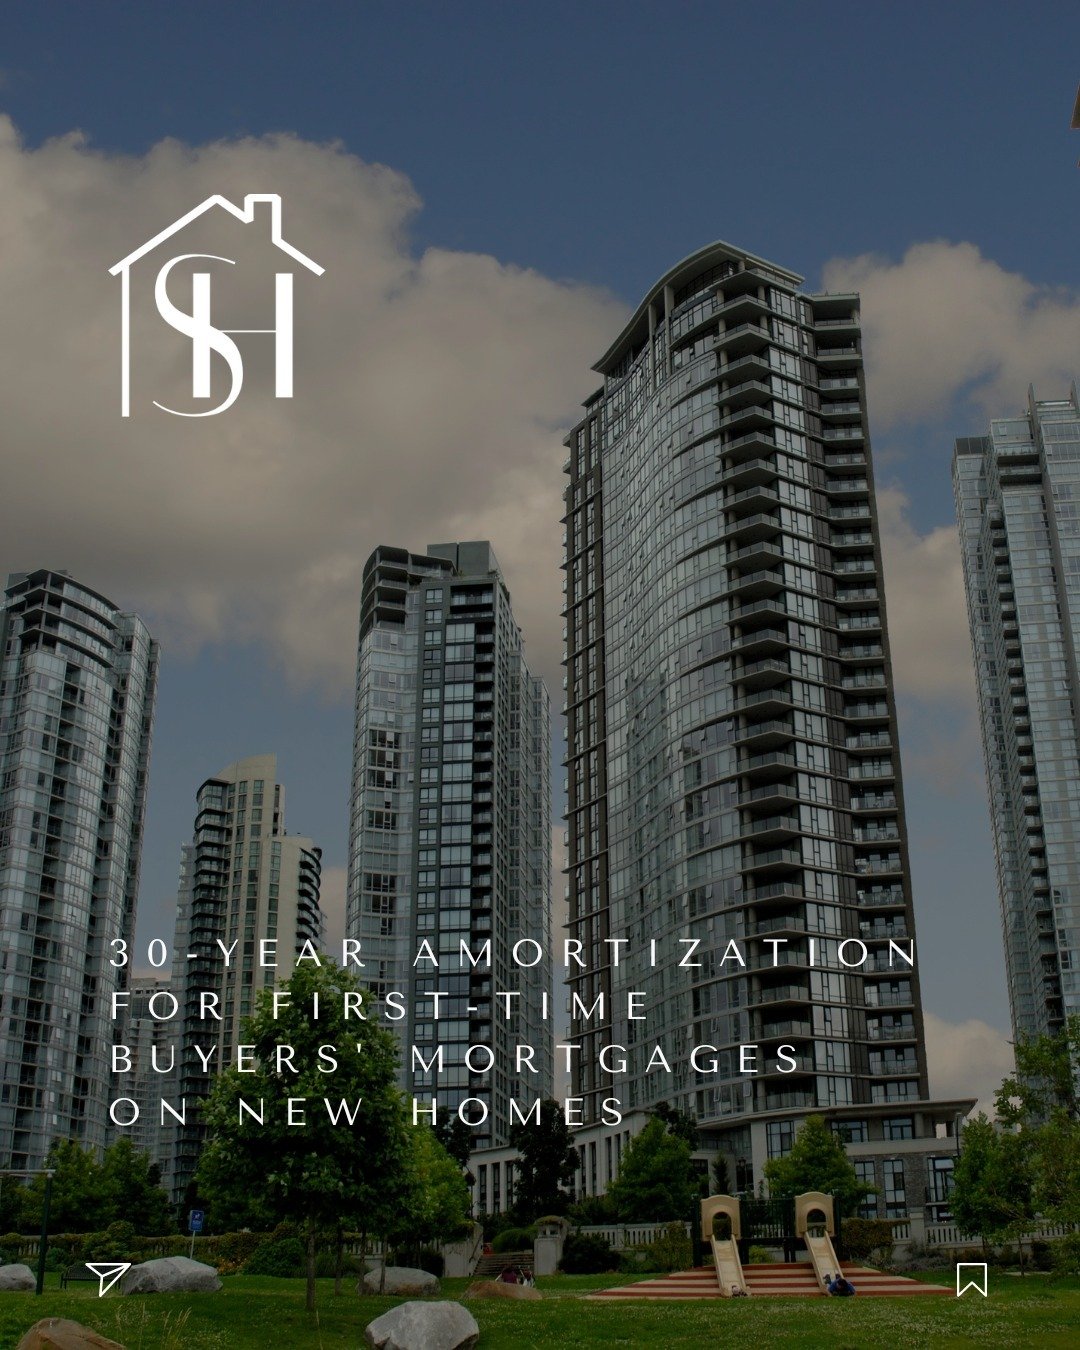 REAL ESTATE NEWS! Canada to allow 30-year amortization for first-time buyers' mortgages on new homes. ⁠
⁠
Speaking in Toronto on Thursday, Finance Minister Chrystia Freeland announced the federal government will allow 30-year amortization periods on 